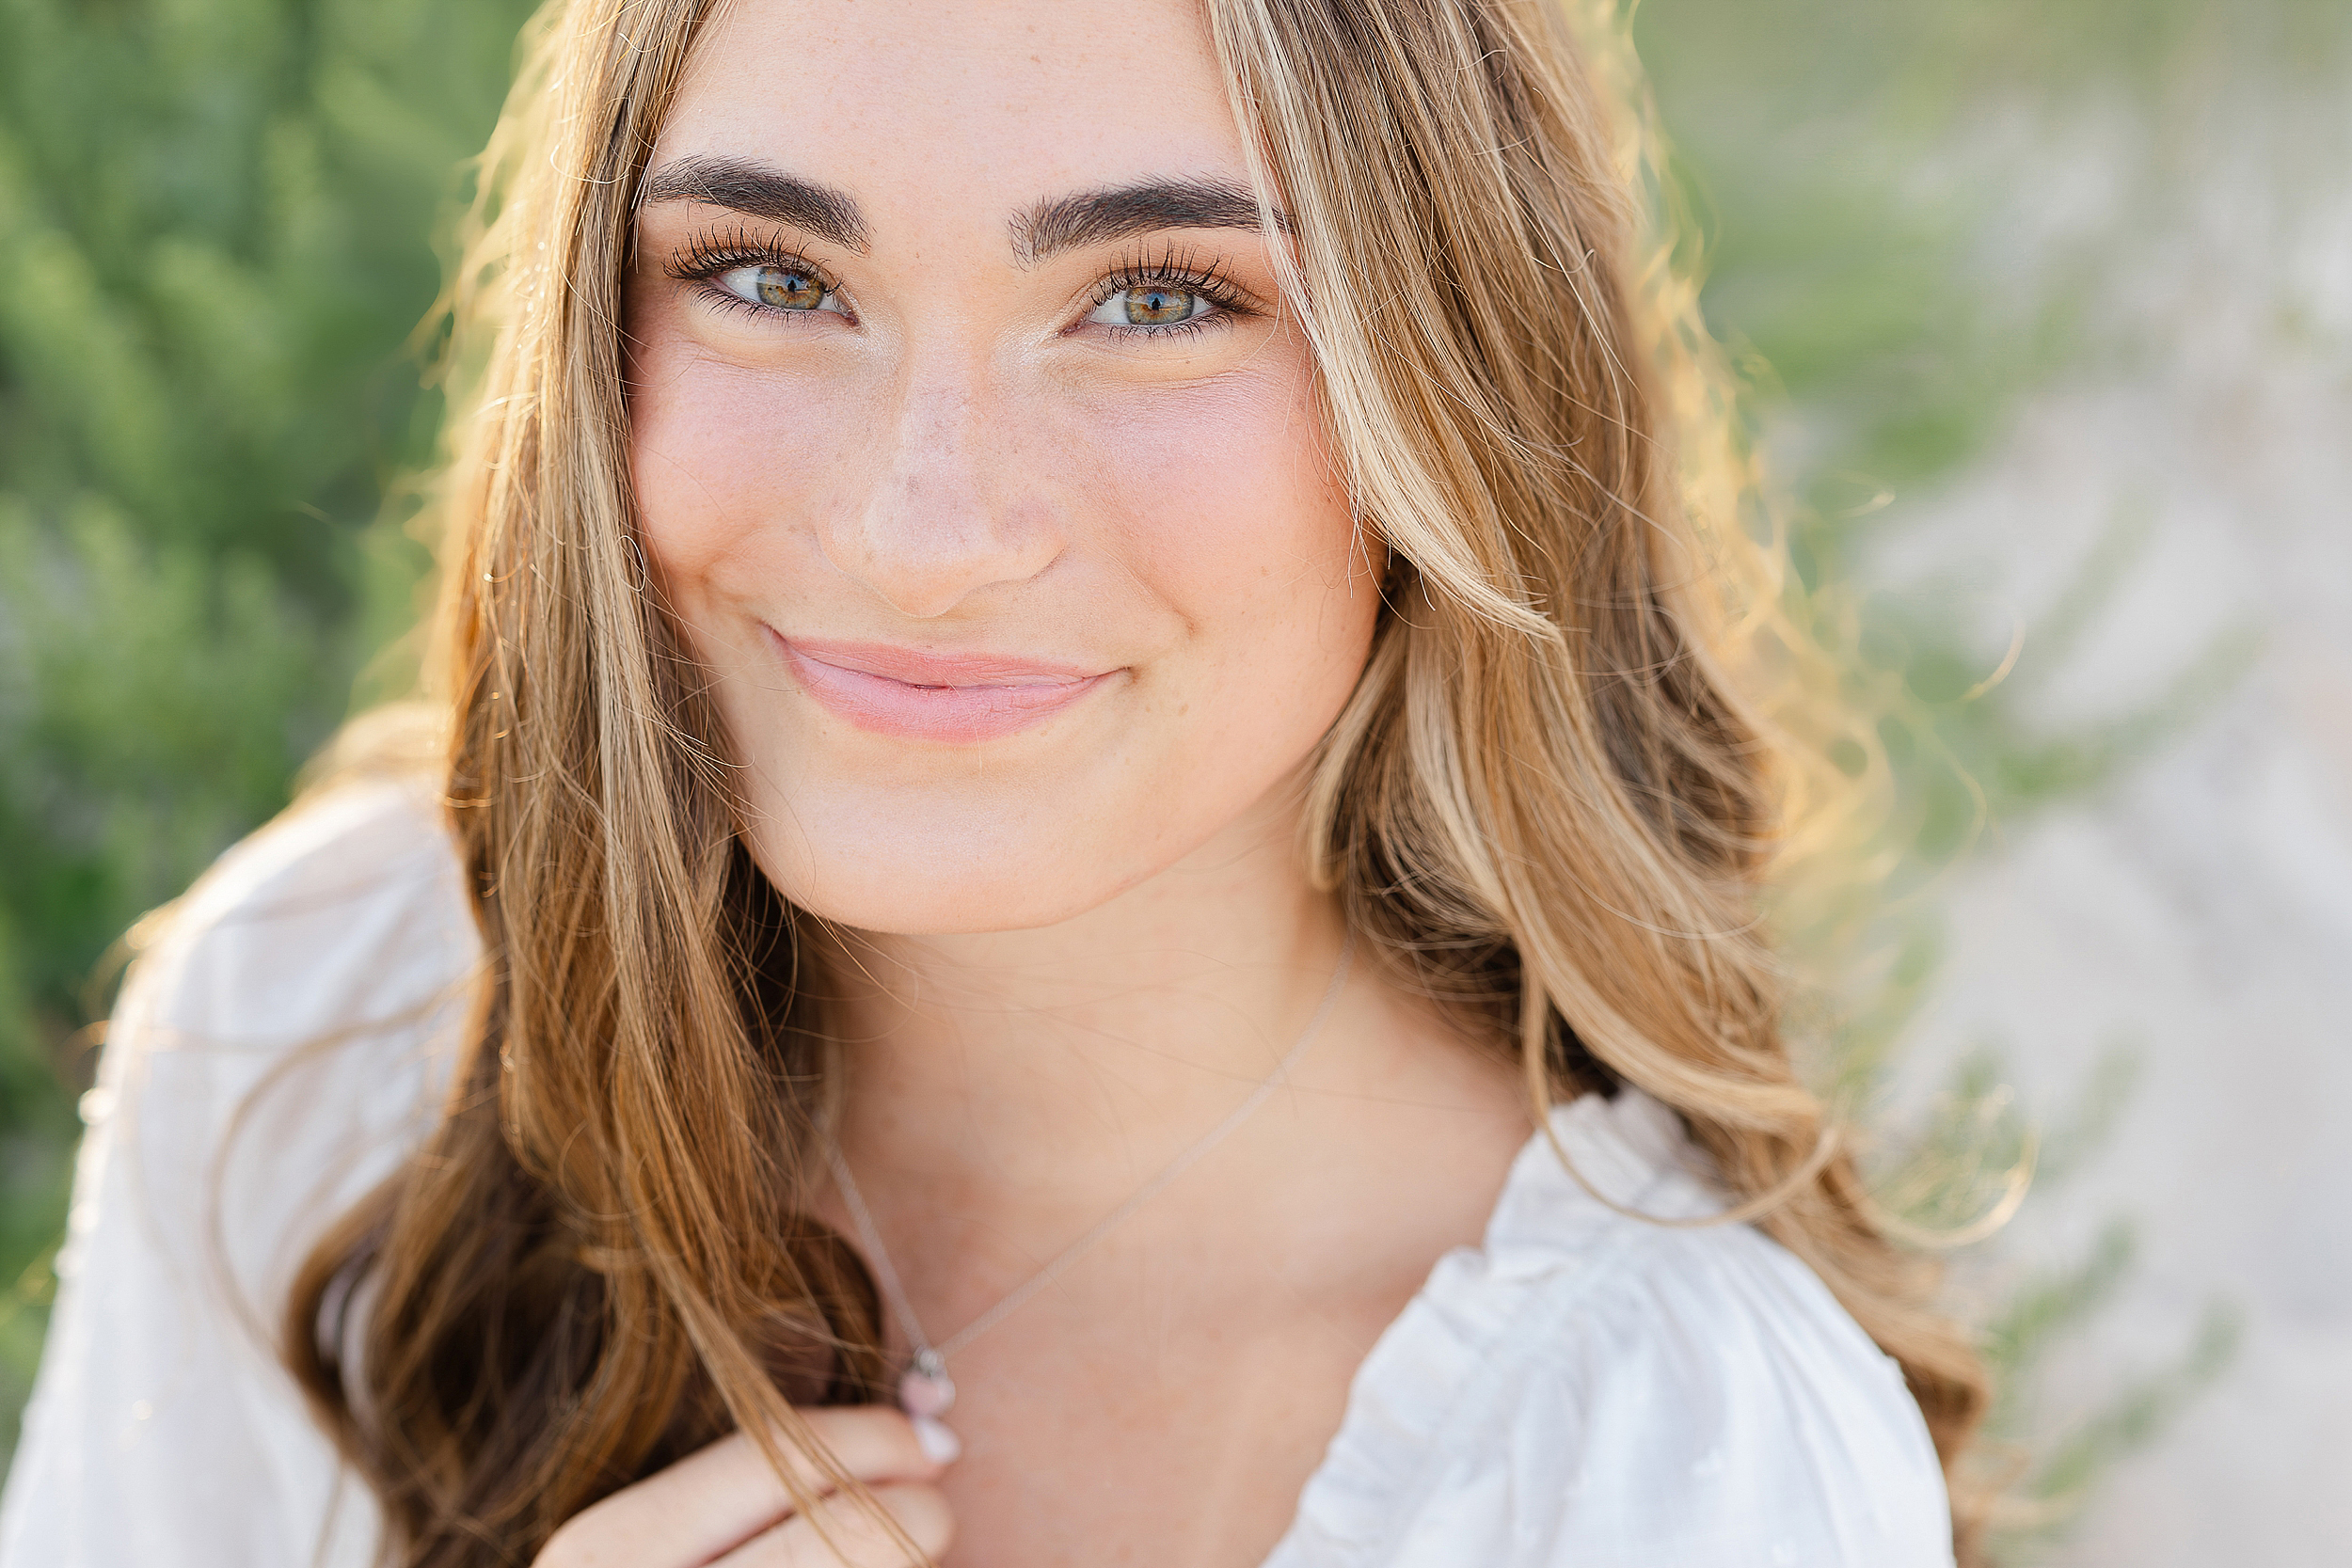 Close up portrait of young woman during a grad photo session.